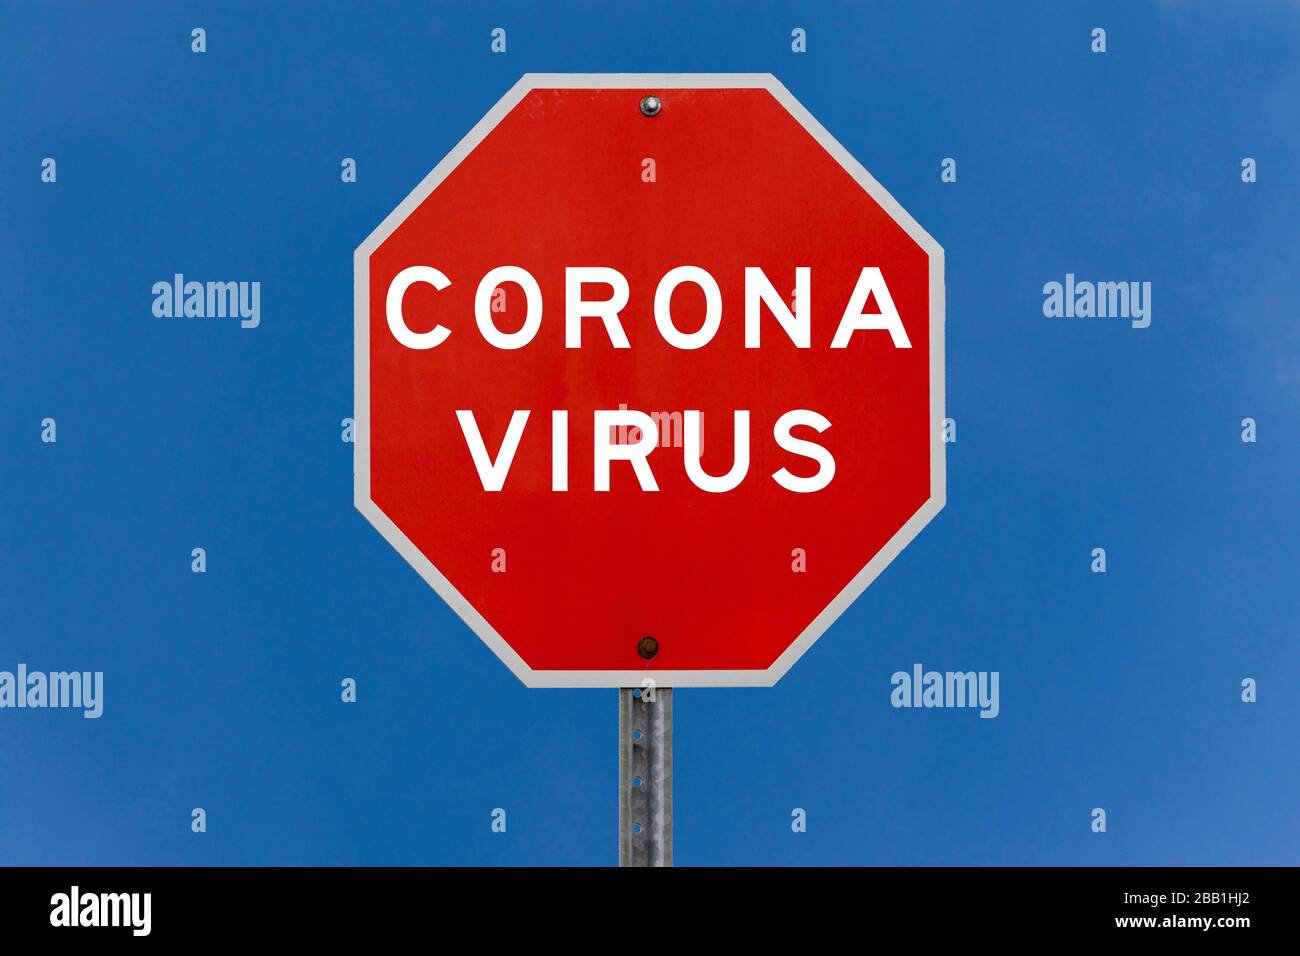 Corona virus warning sign with clear blue sky background Stock Photo